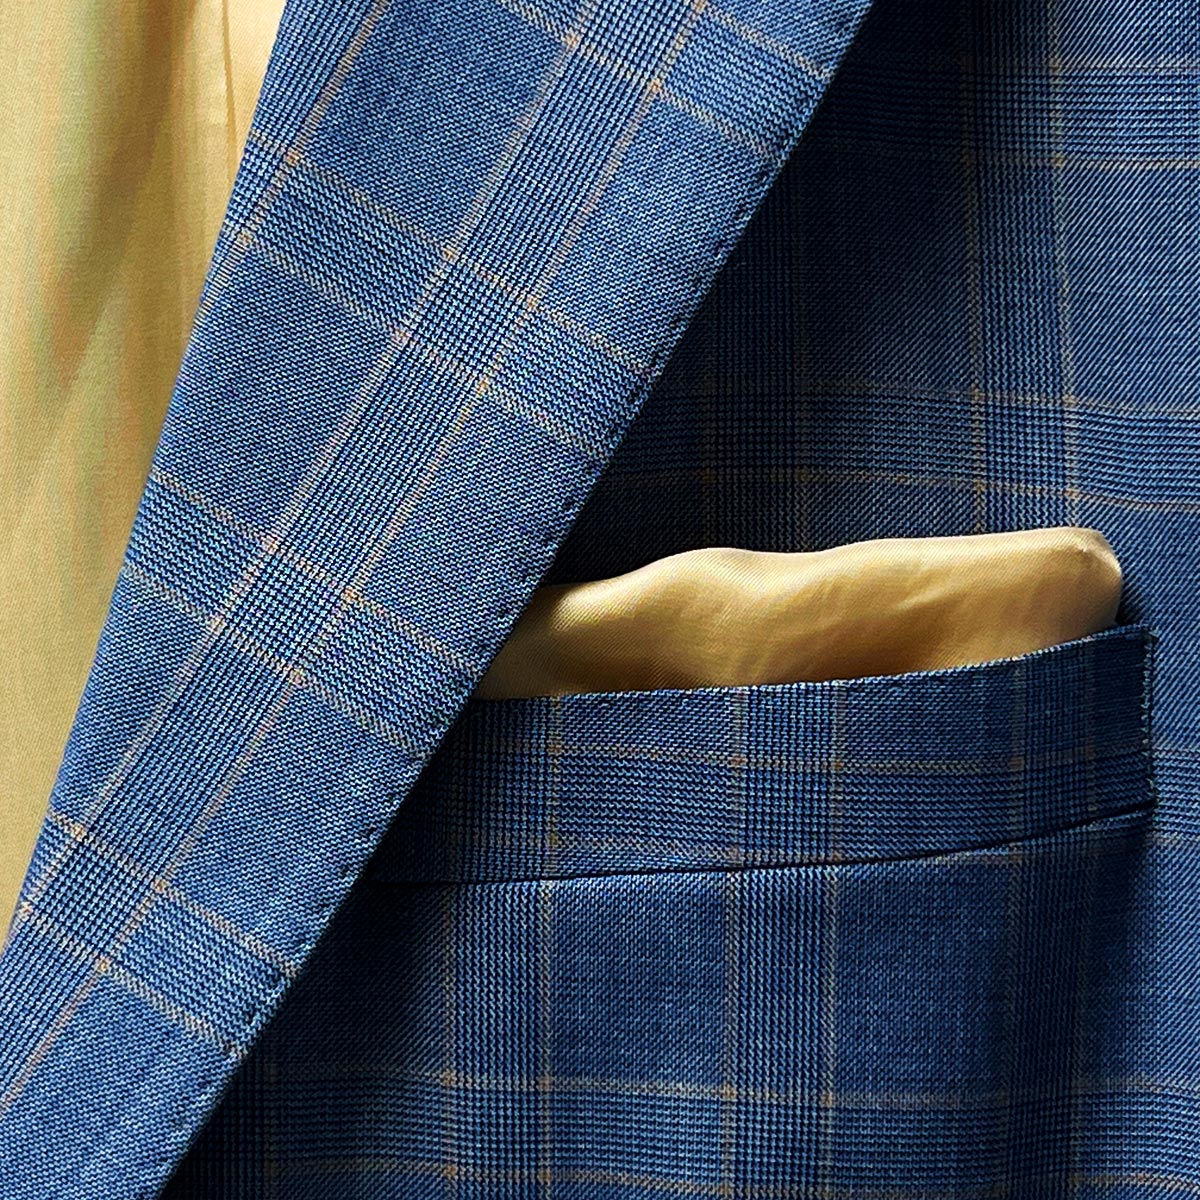 Pocket square adding a stylish element to a stone blue business suit.